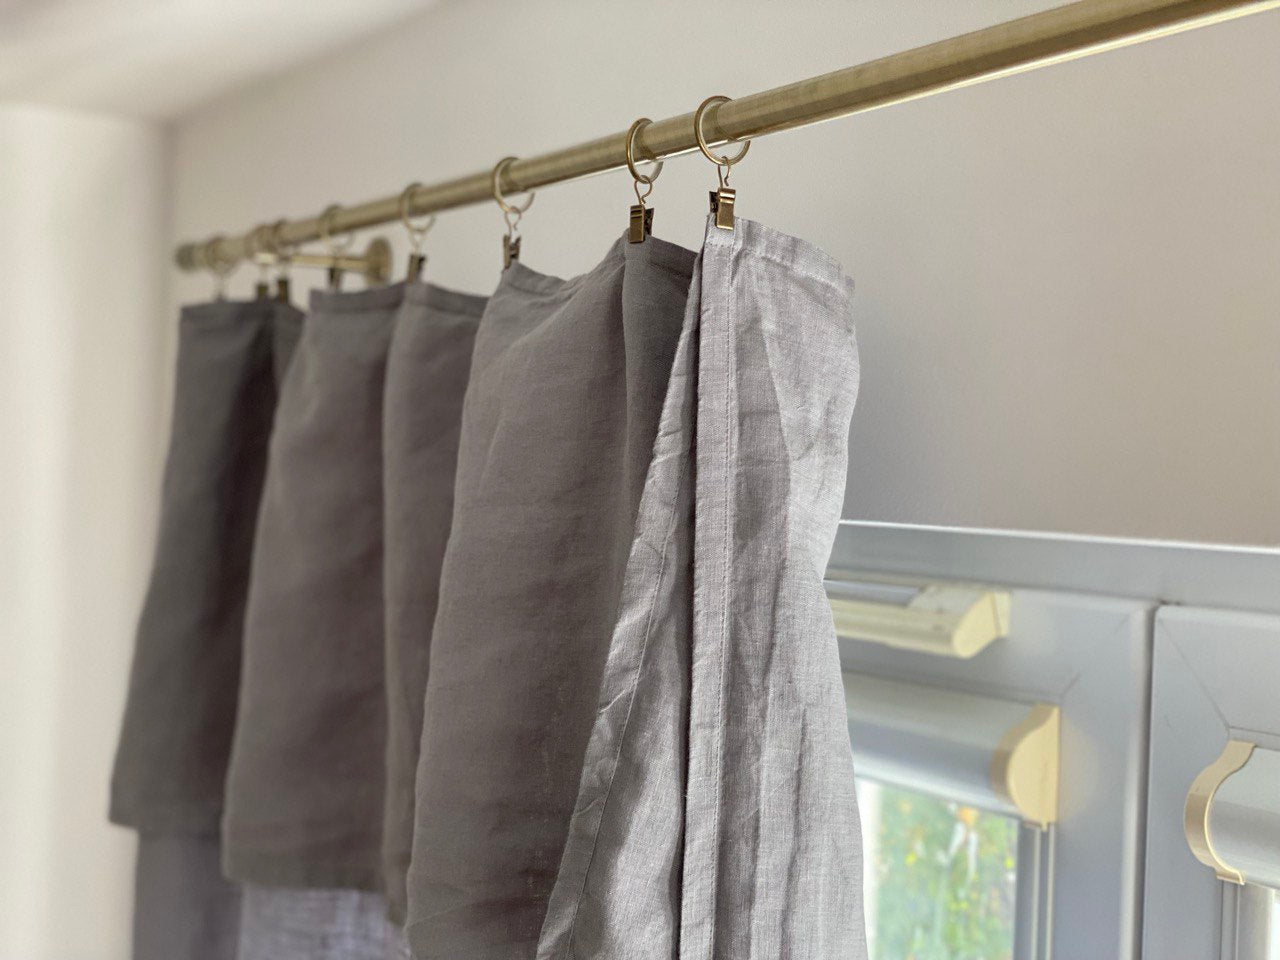 Linen Curtain for Rings and Clips  - 124, 138 or 250 cm Width, Custom Length - Drop Cloth Linen Curtains